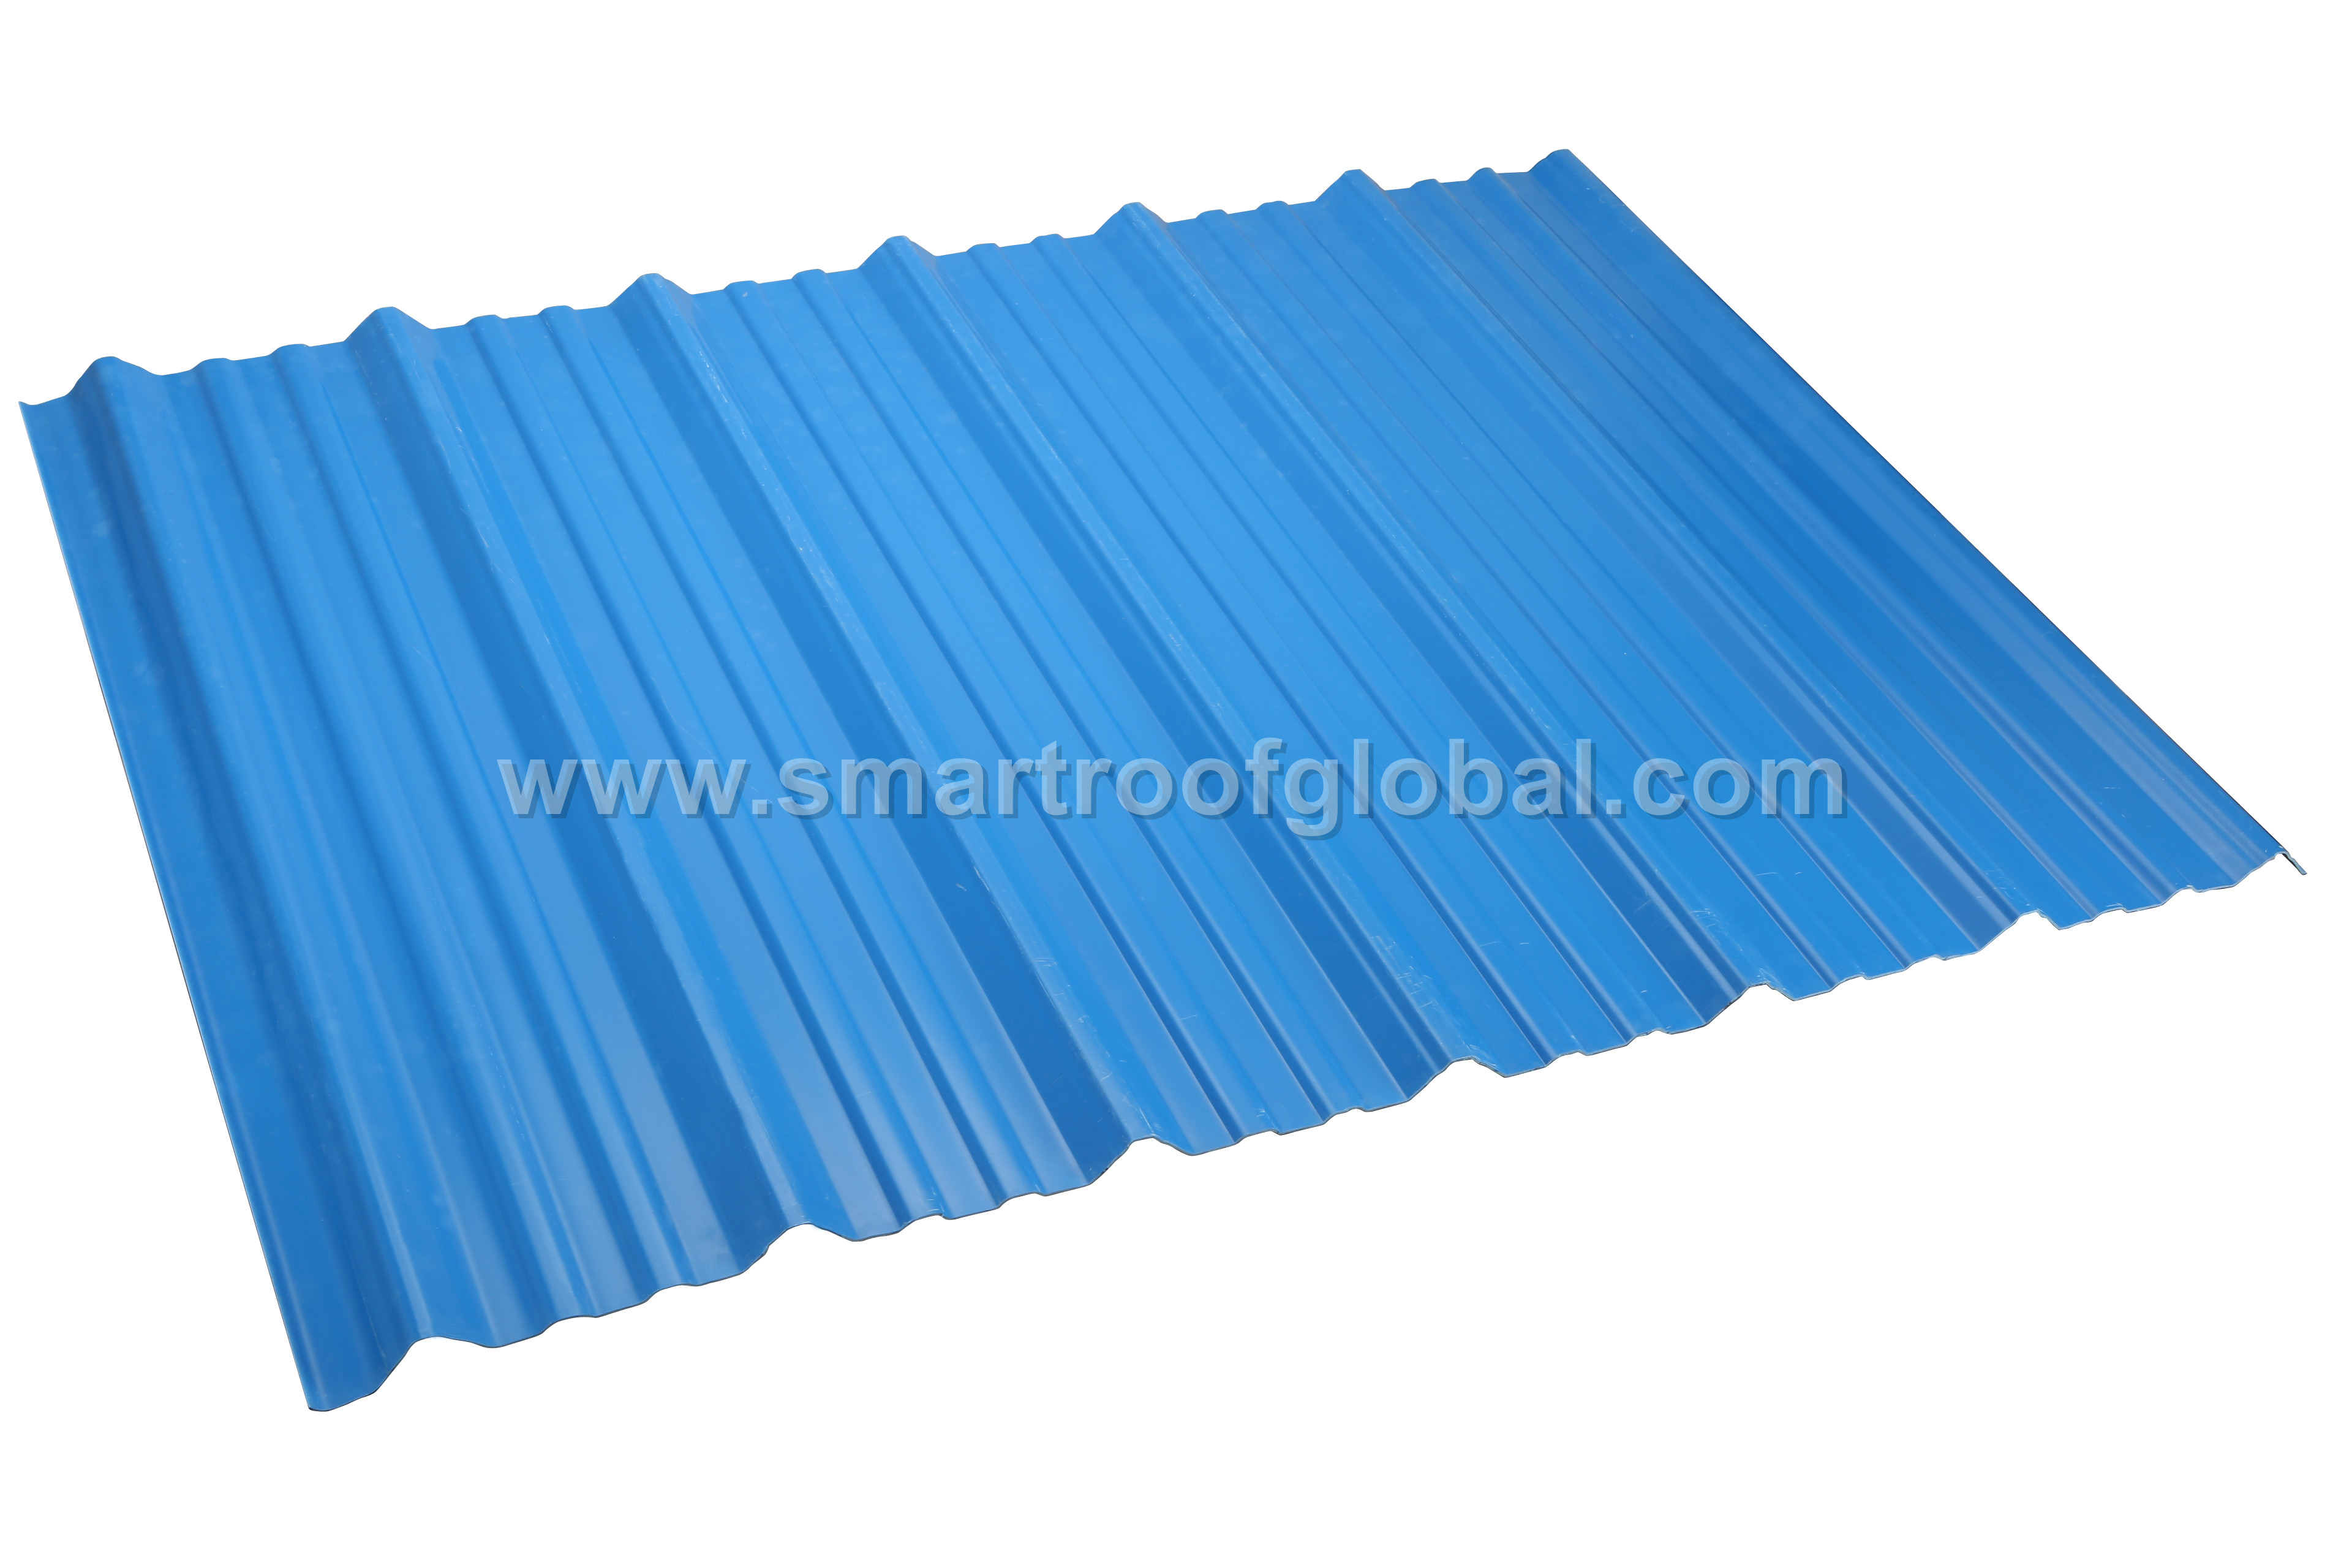 Manufactur standard Decorative Steel Sheets - Pvc Corrugated Roofing Sheets – Smartroof